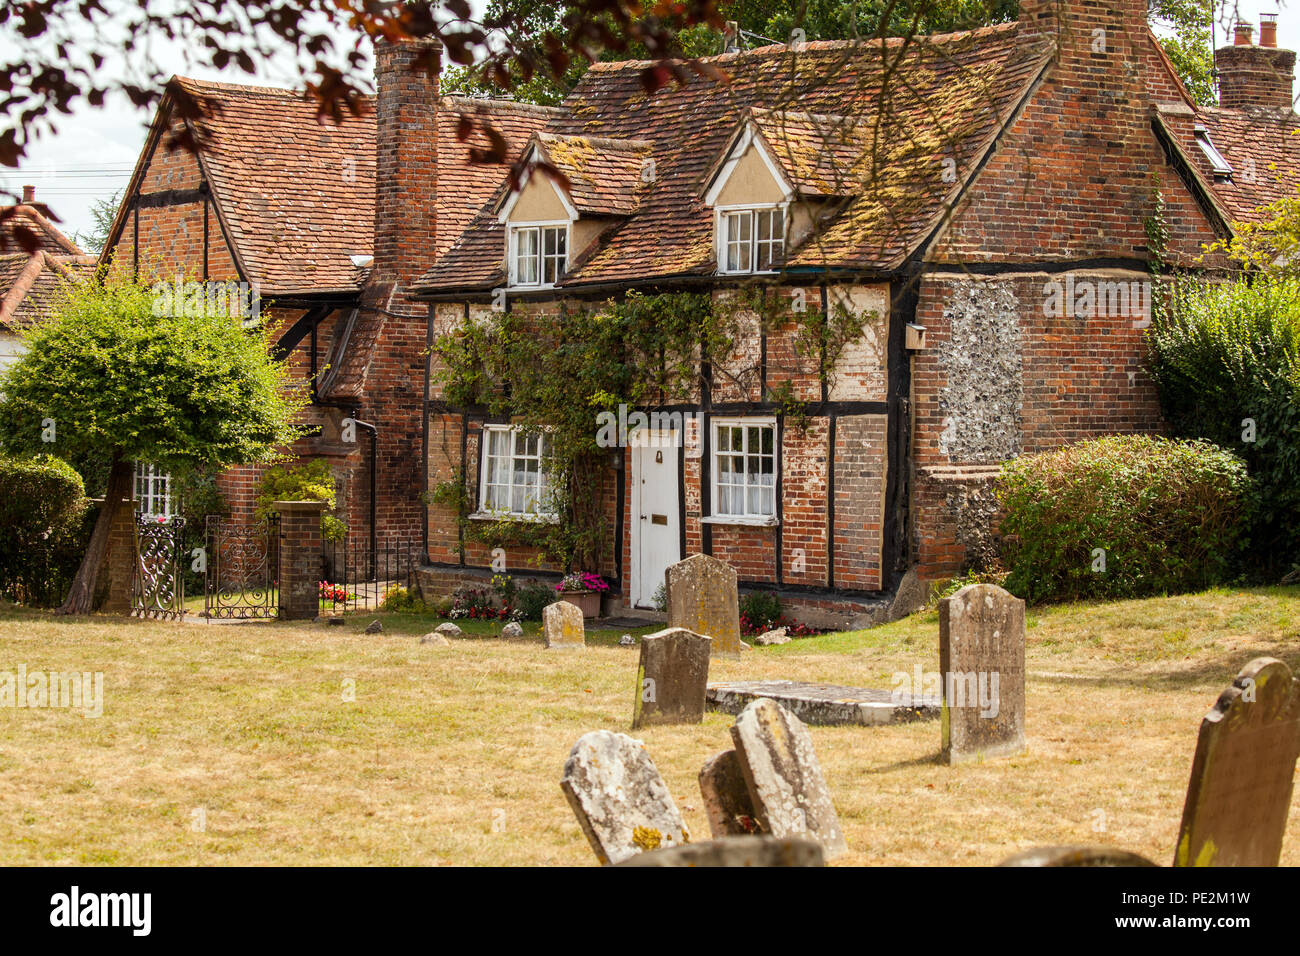 St Mary the virgin churchyard in the village of Turville  Buckinghamshire England UK location for the vicar of Dibley and many Midsomer murders Stock Photo